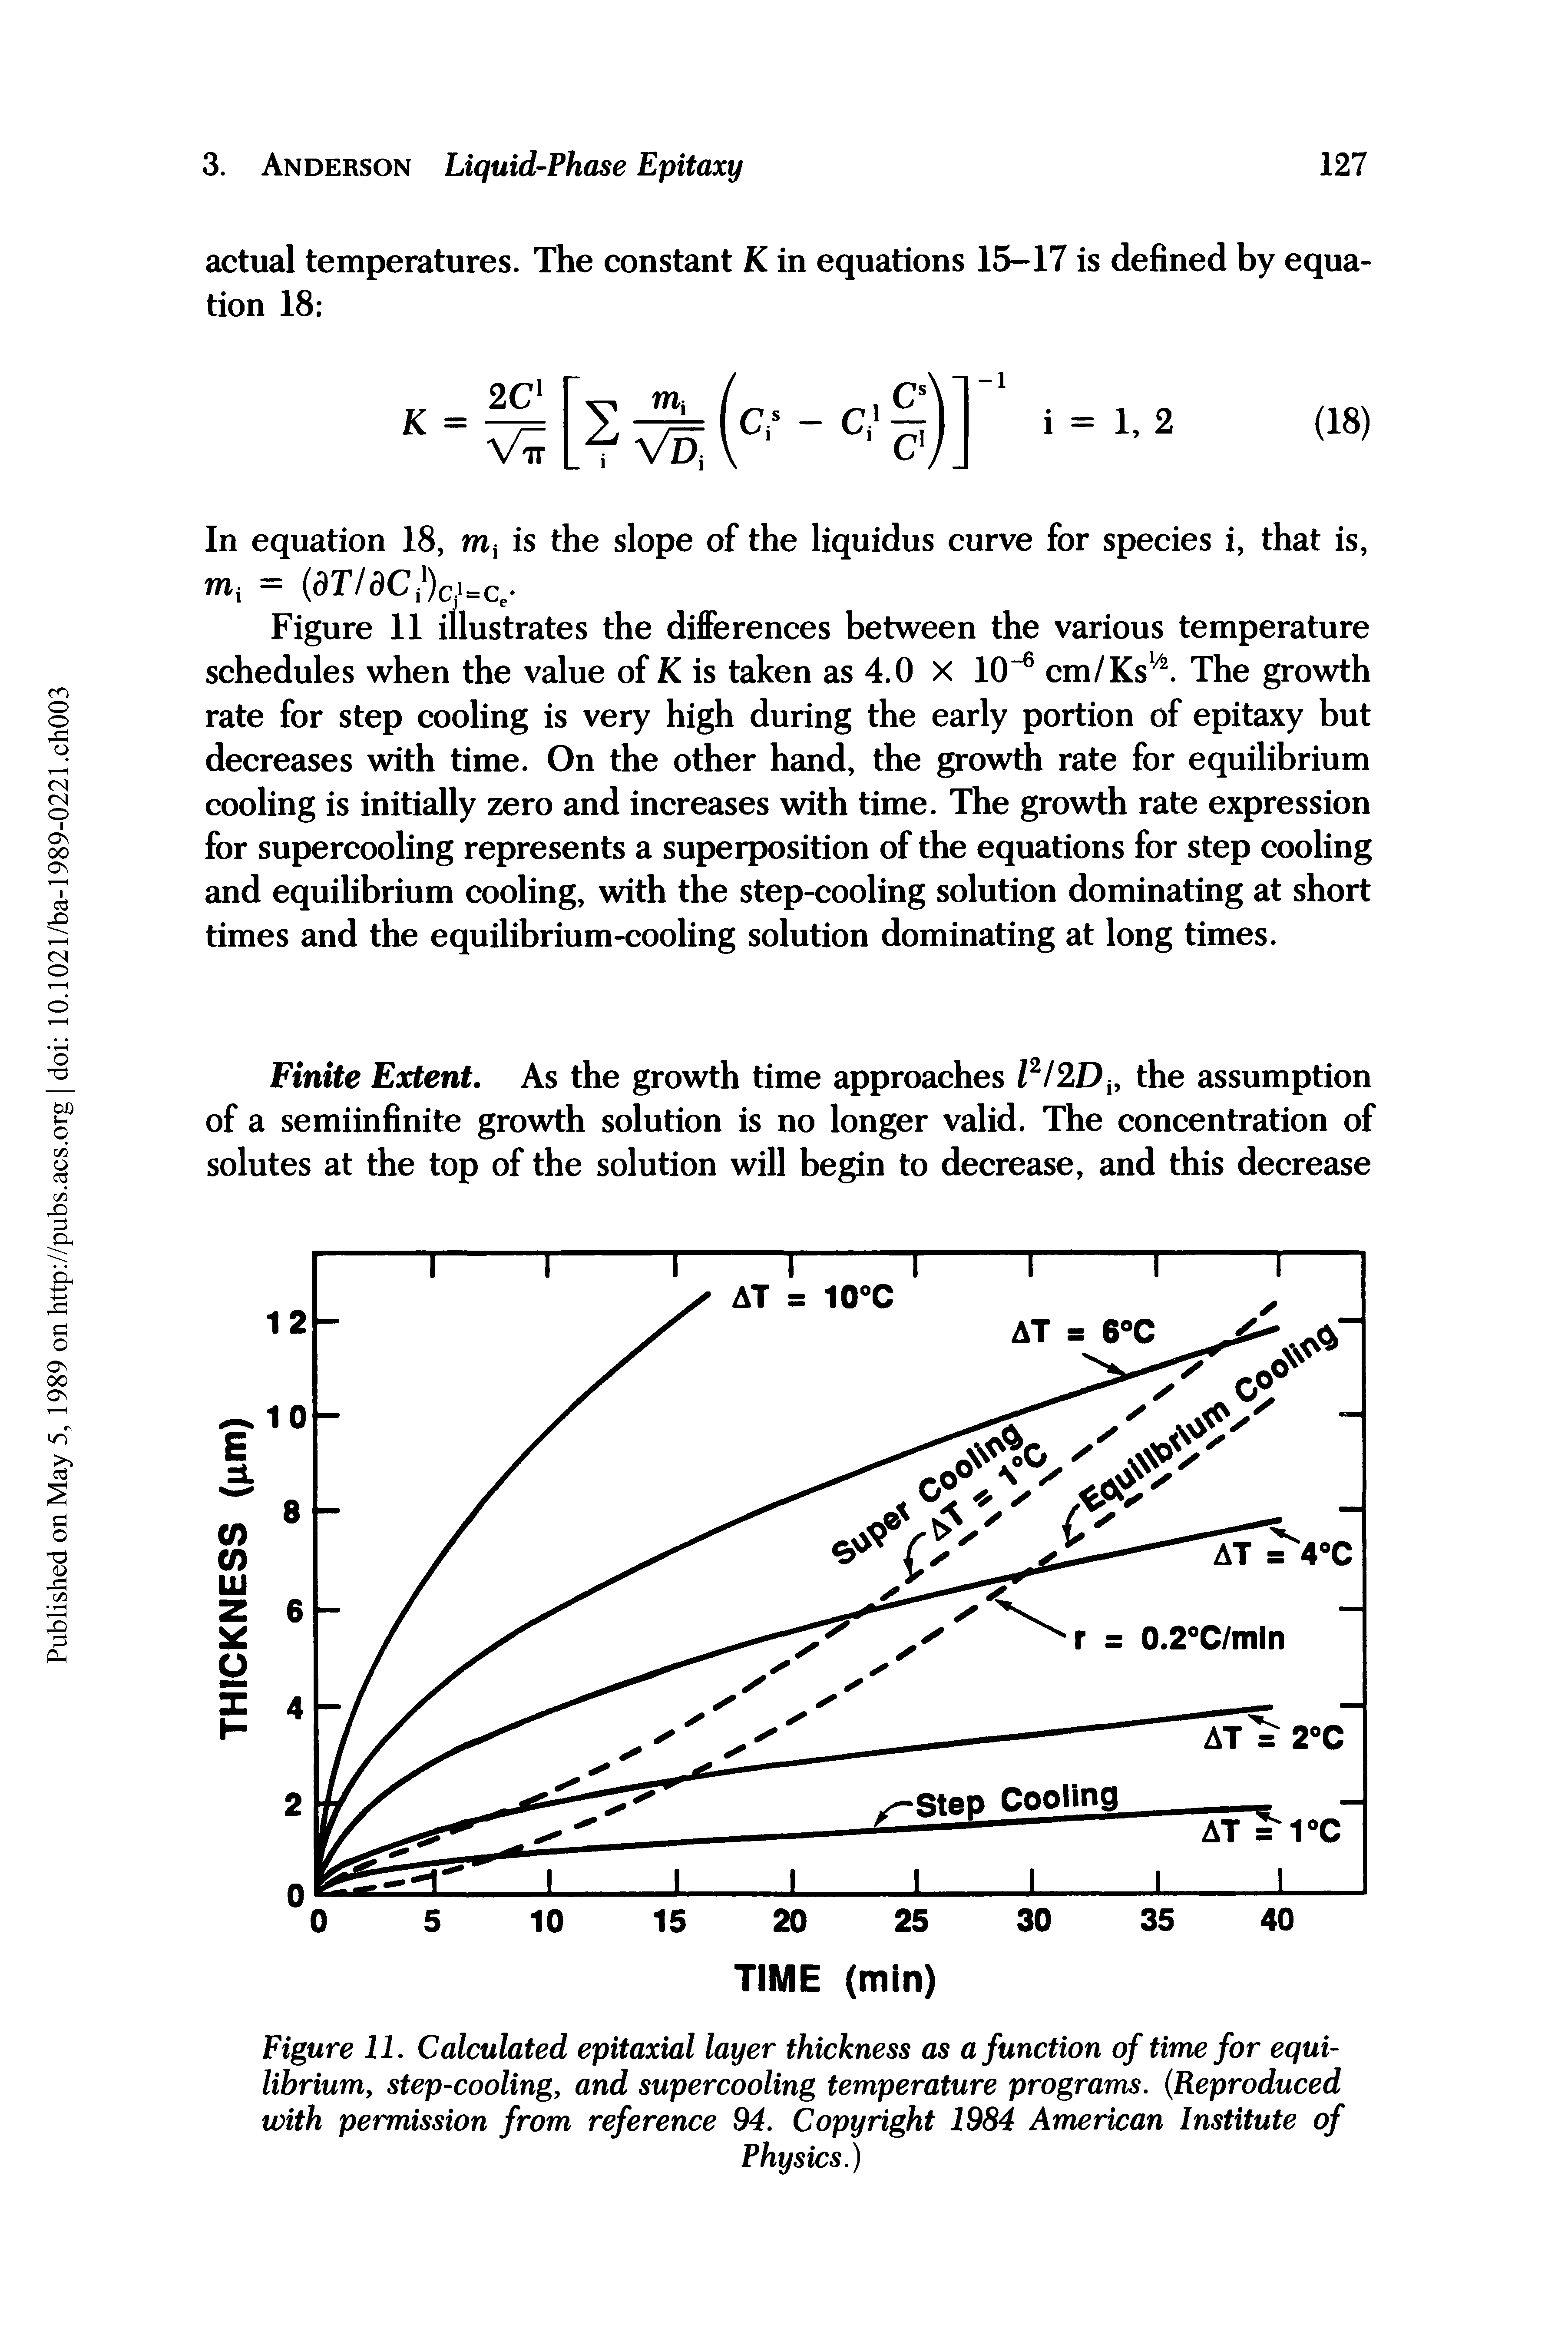 Figure 11. Calculated epitaxial layer thickness as a function of time for equilibrium, step-cooling, and supercooling temperature programs. (Reproduced with permission from reference 94. Copyright 1984 American Institute of...